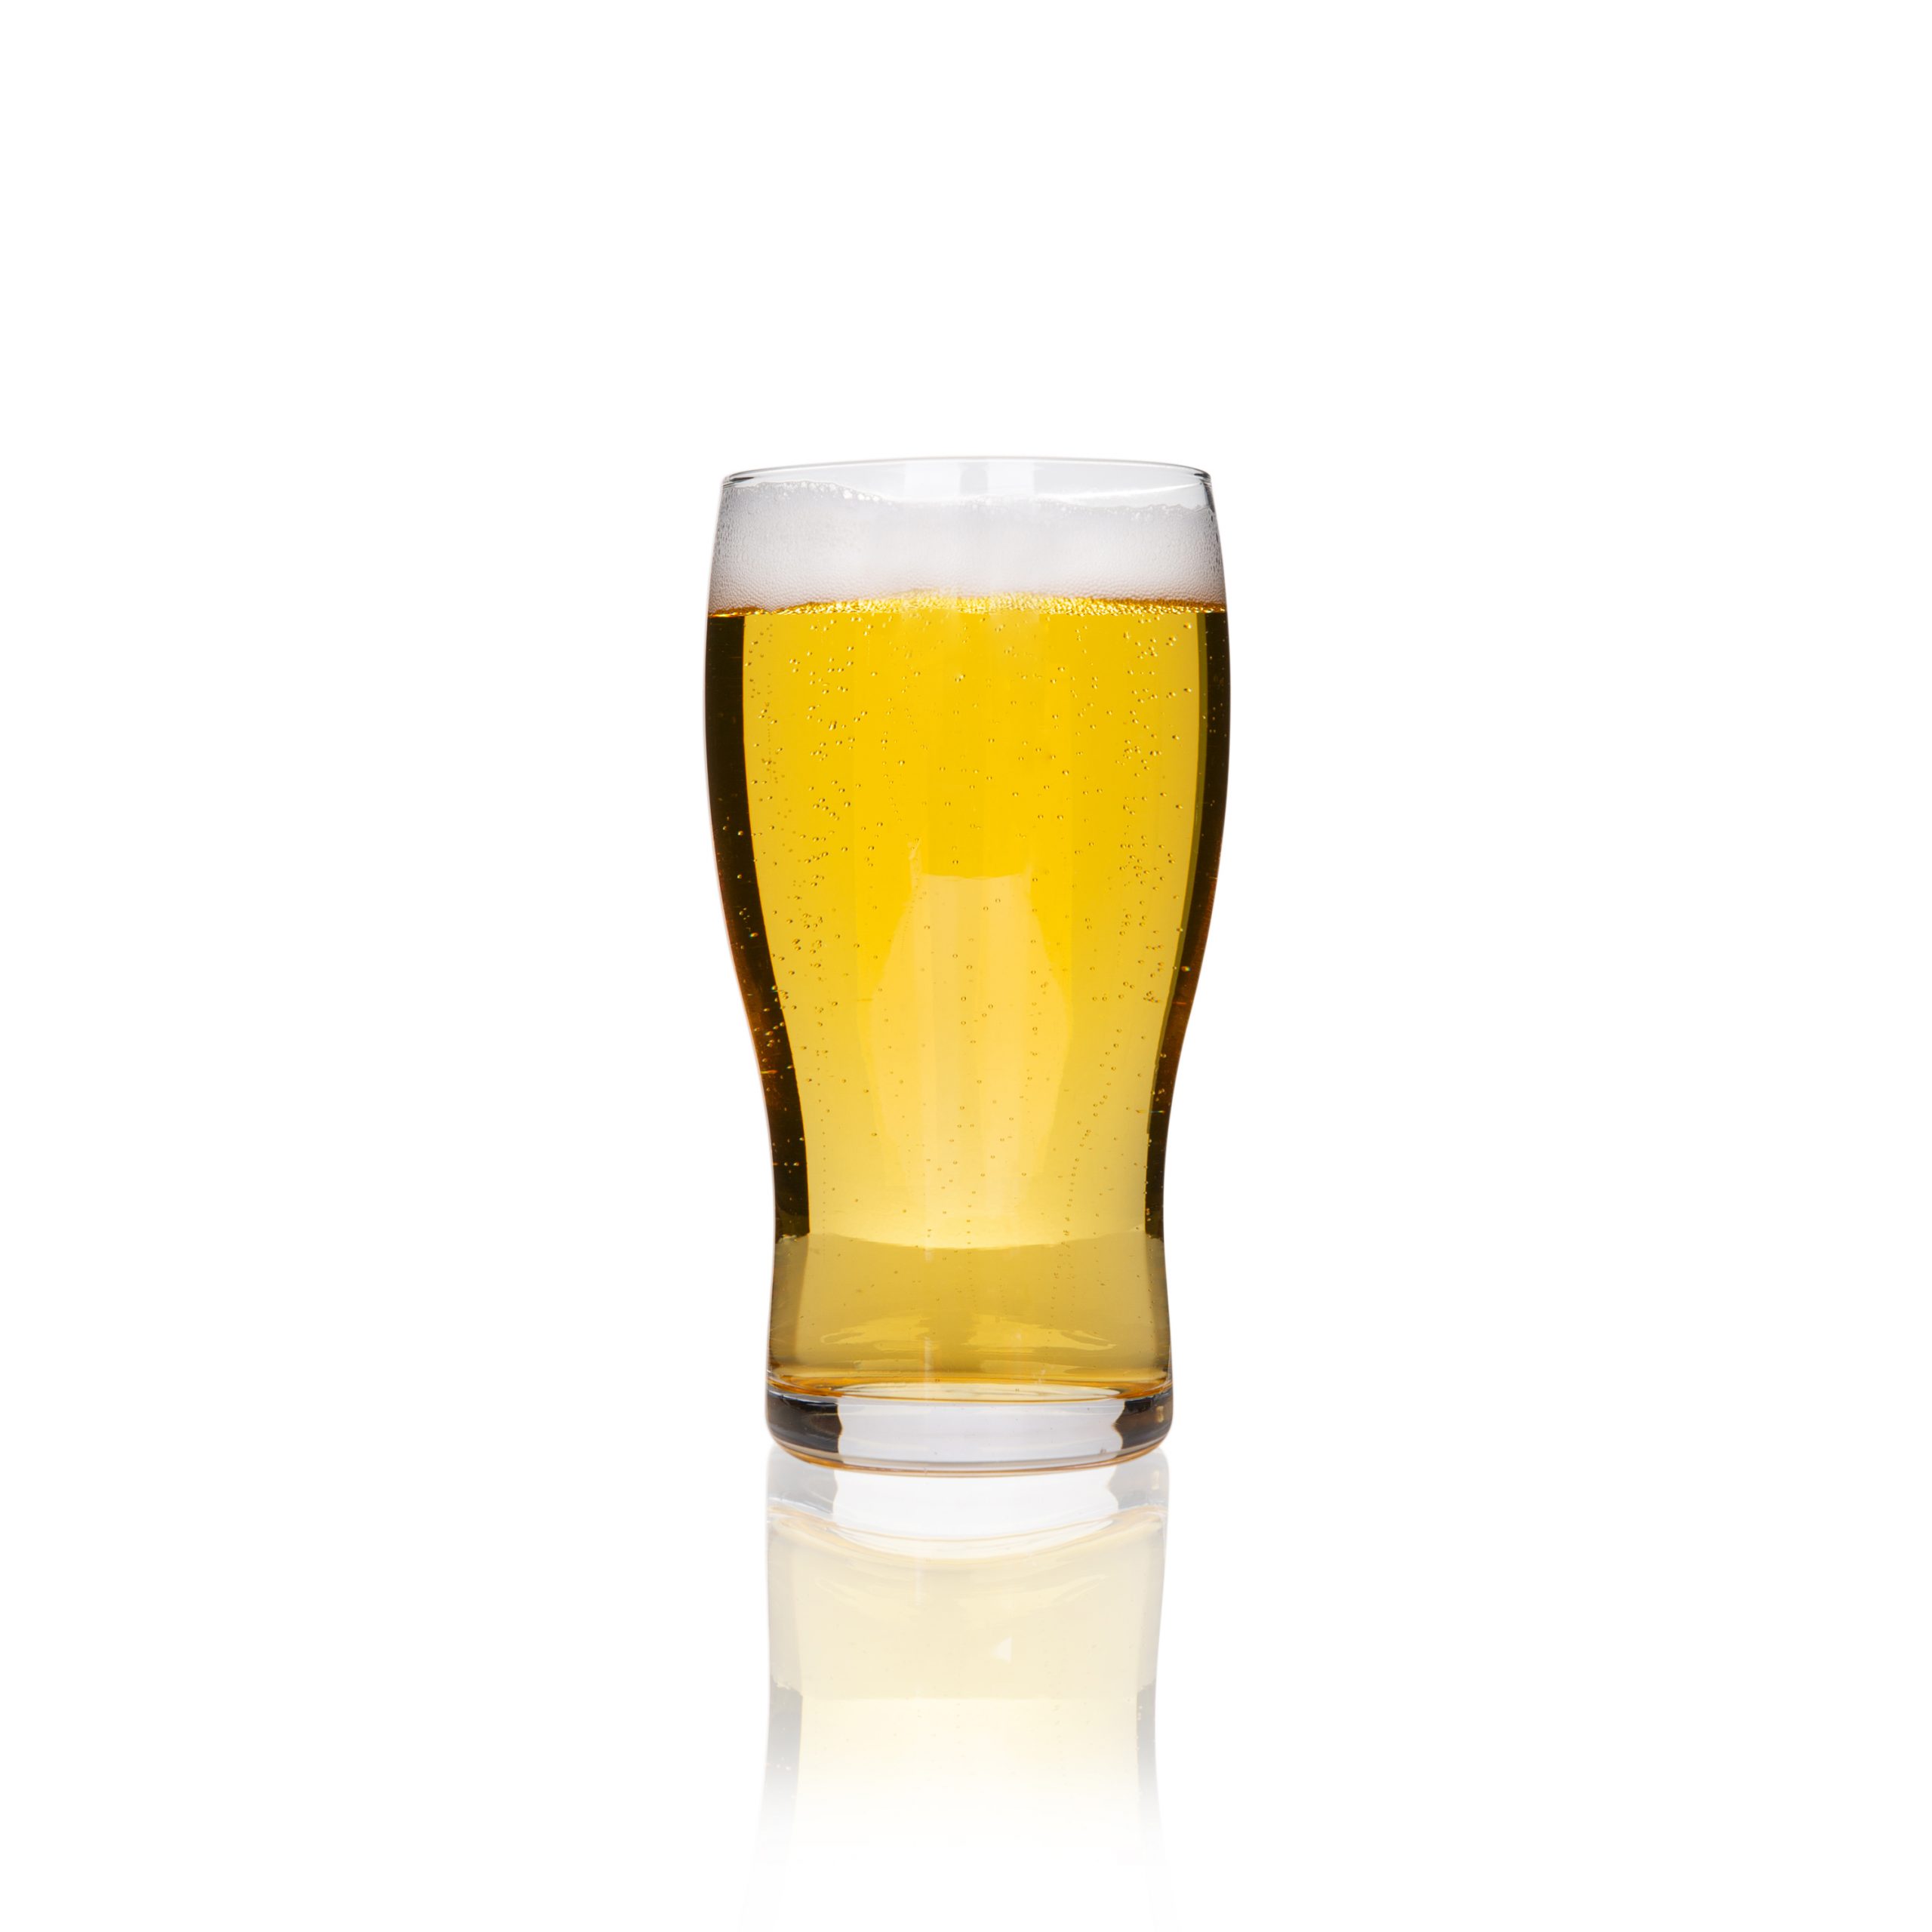 https://burns-glass.com/wp-content/uploads/2023/06/tulip-glass-with-20oz-beer-scaled-1.jpg